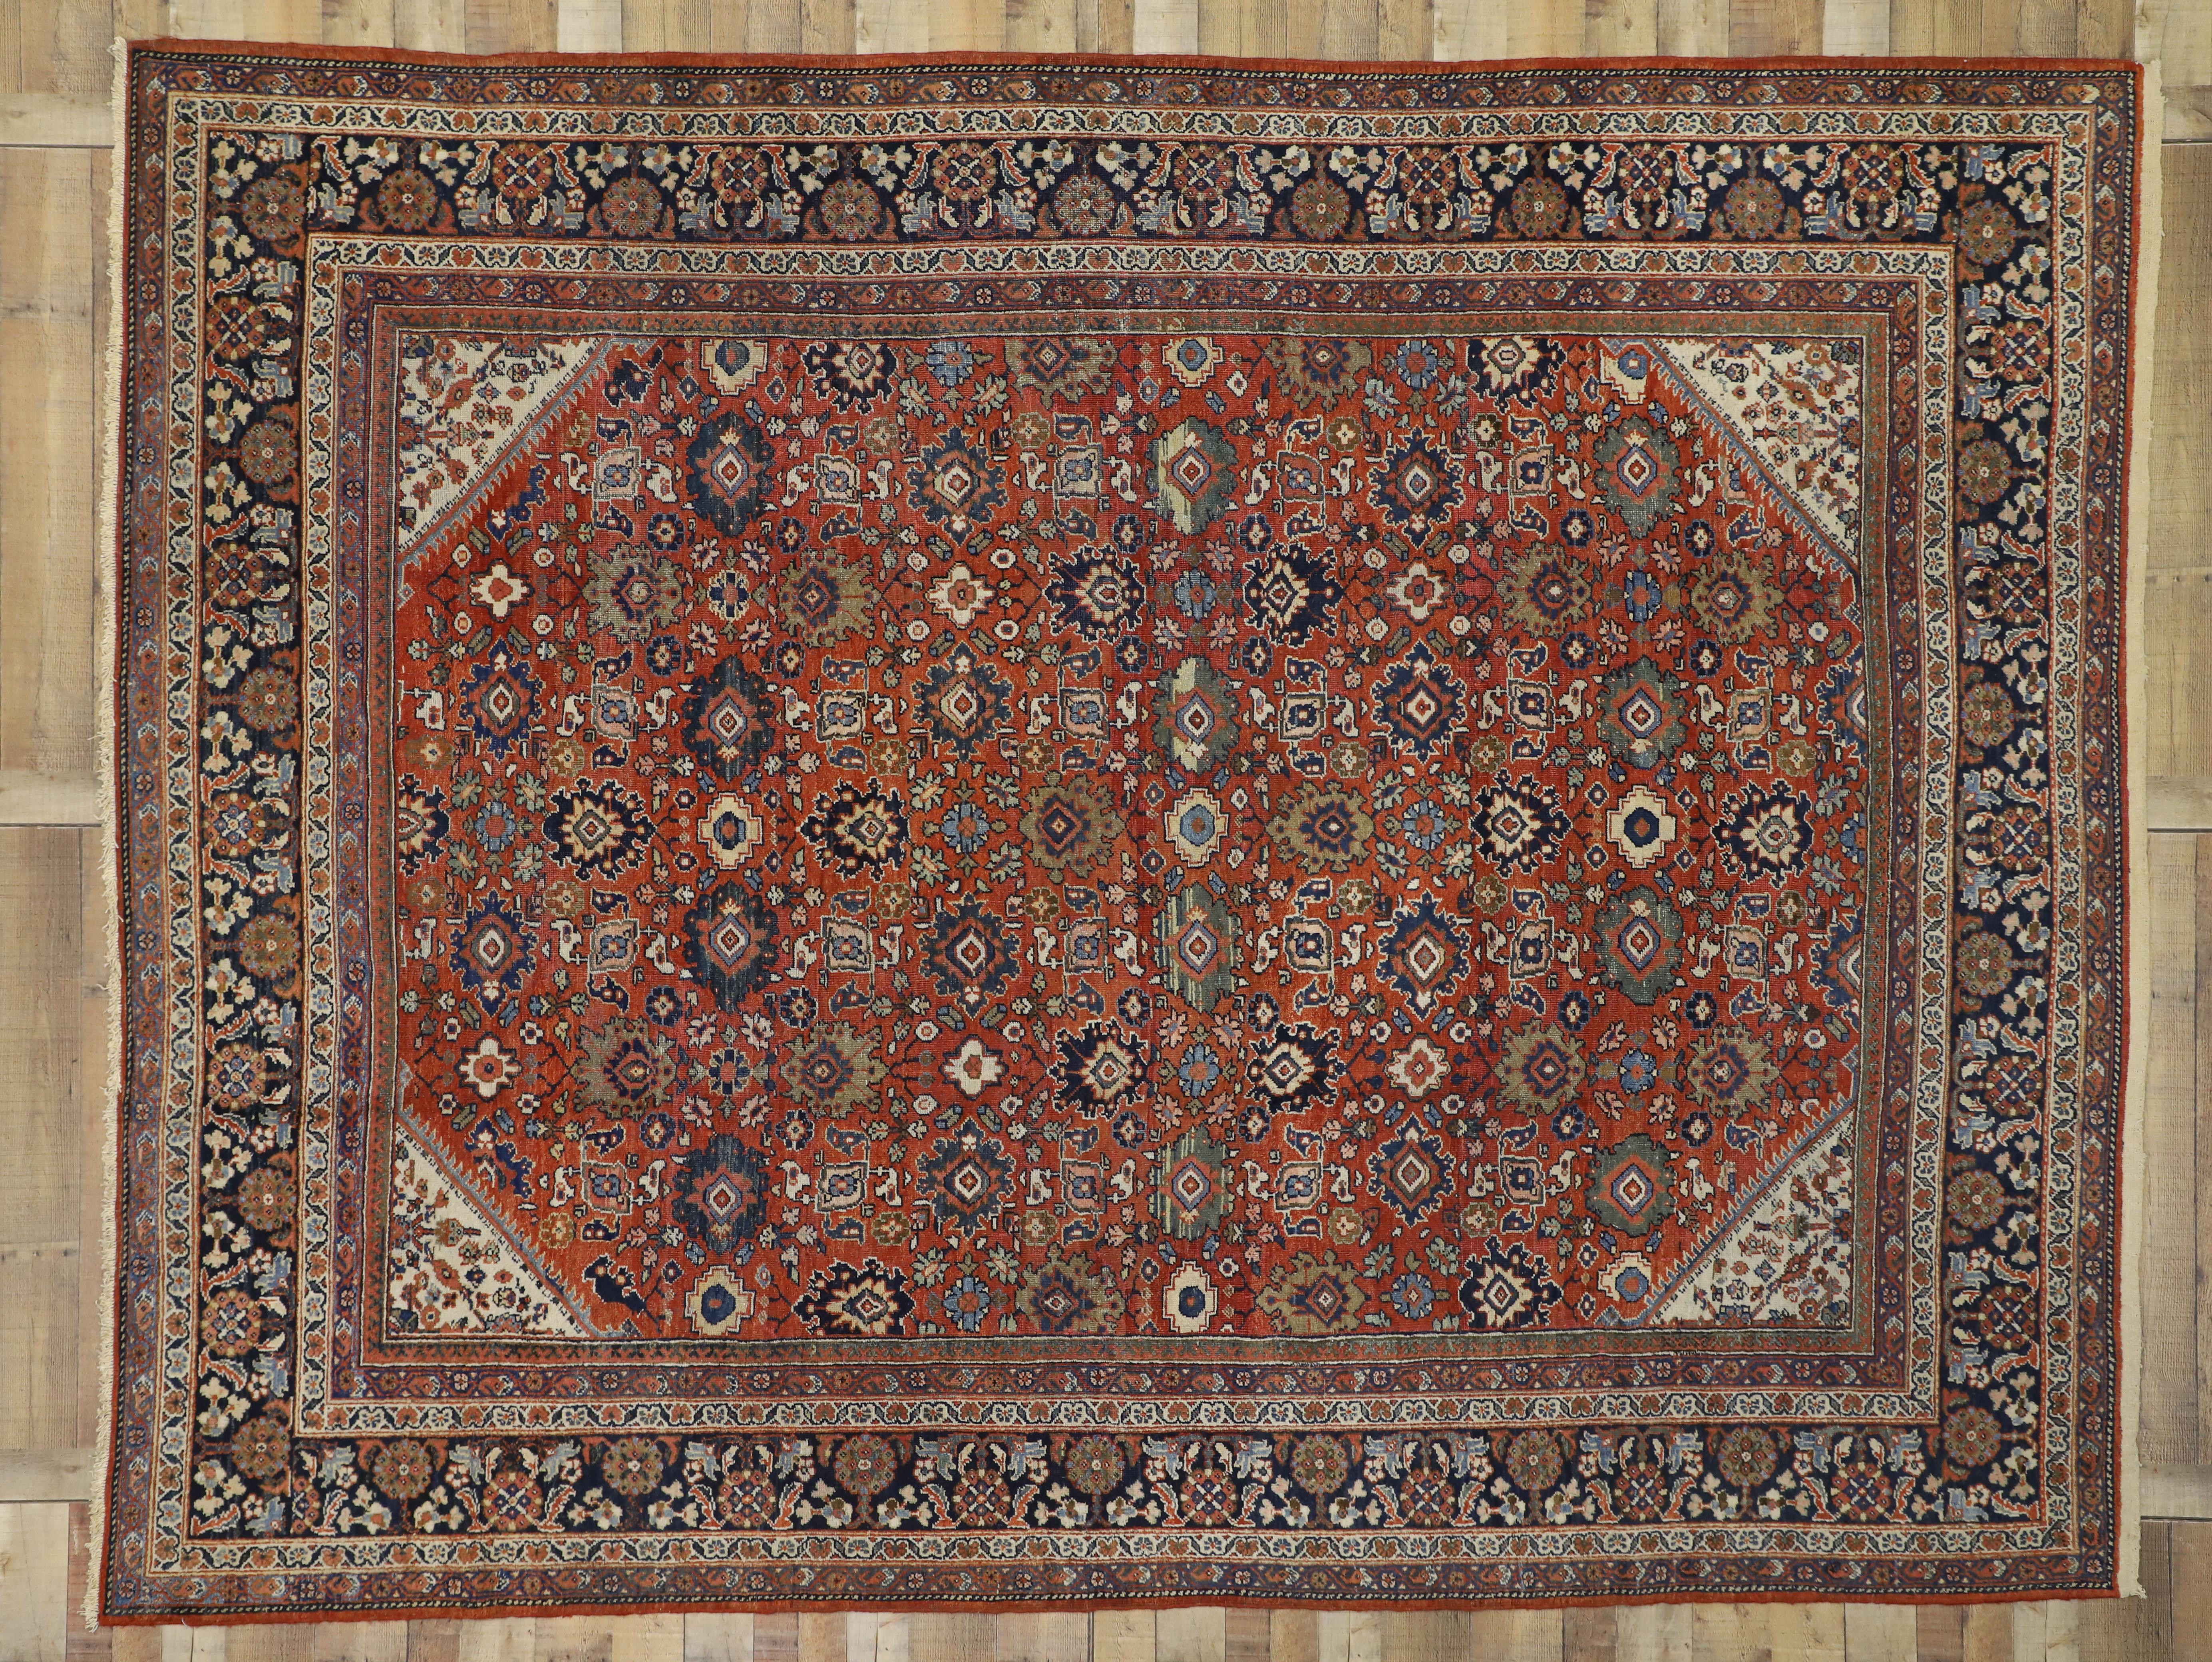 Wool Antique Persian Mahal Area Rug with Federal and American Colonial Style